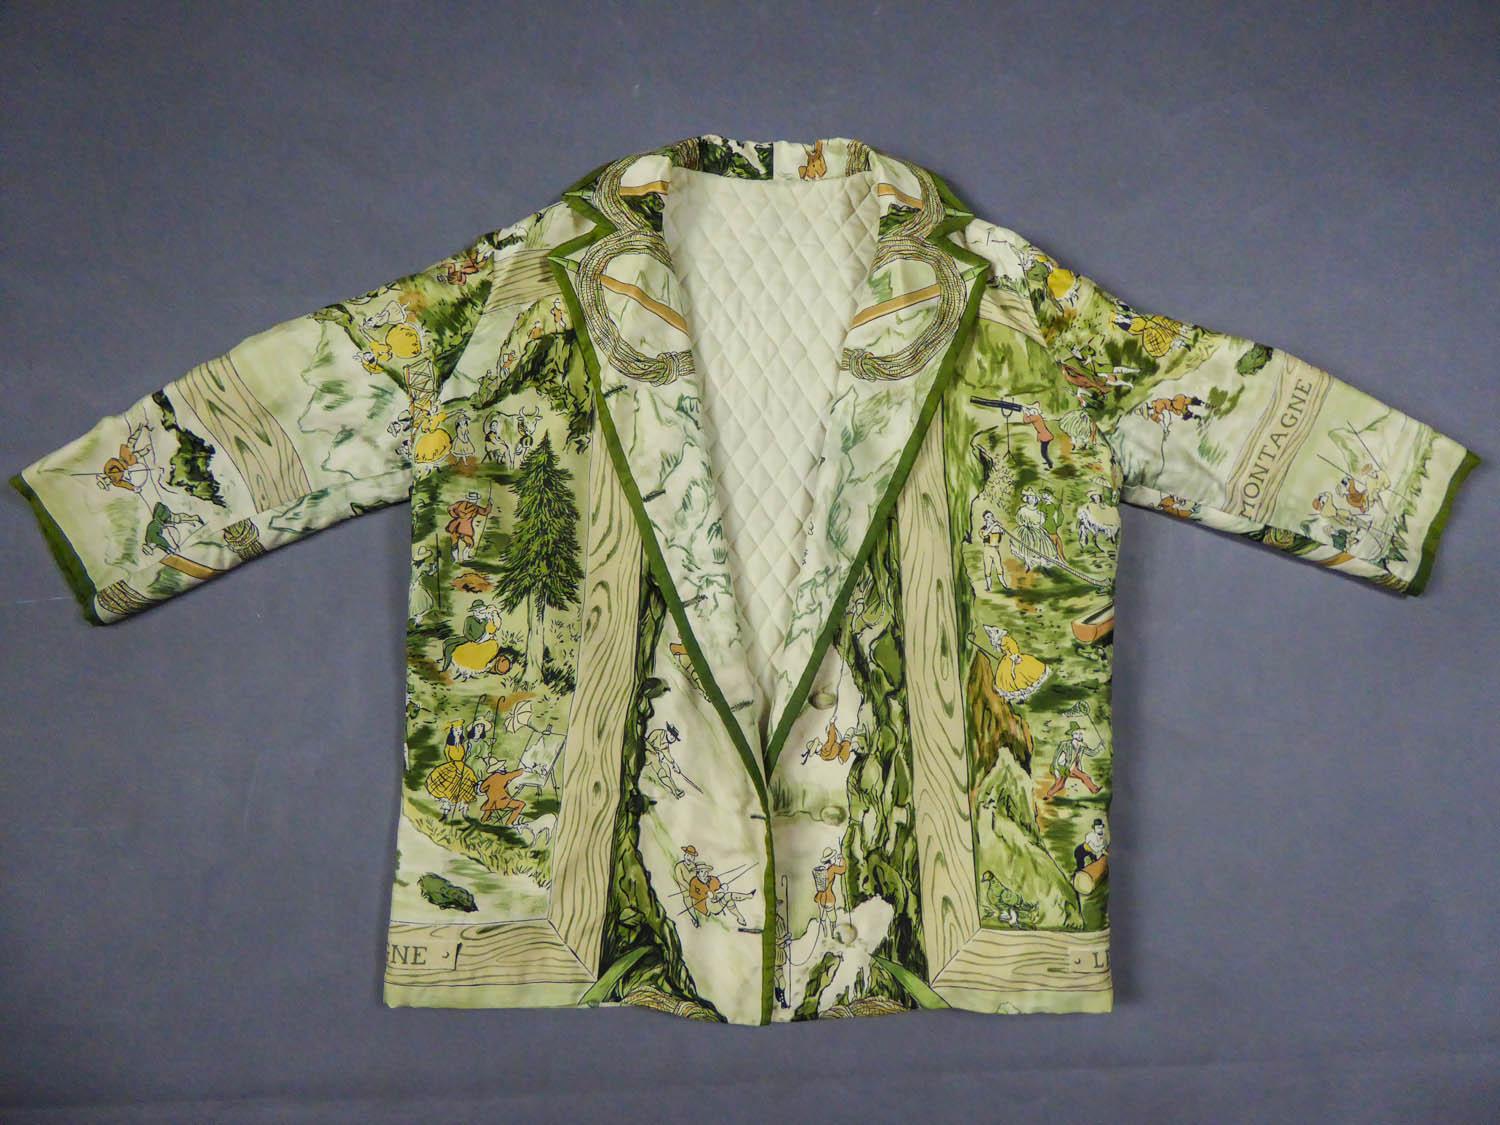 Circa 1955
France

Hermès jacket in quilted silk twill in pastel colors black, golden yellow, moss green and ivory and dating from 1955. This jacket is a variation of a scarf of the same name entitled 